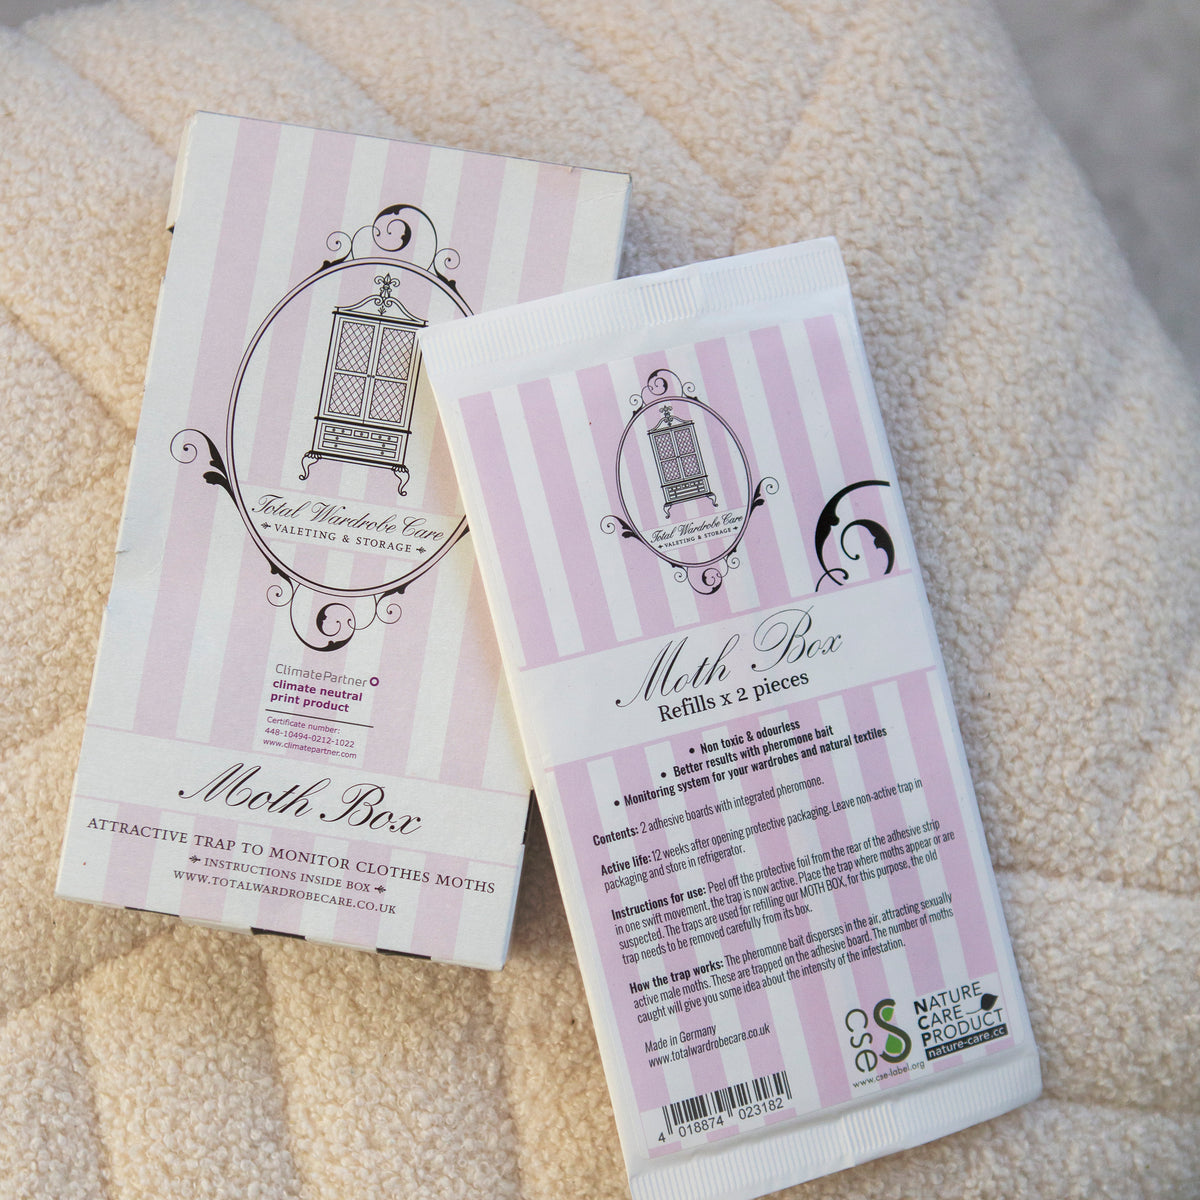 Pink and white packaging for Moth Box refills which contain two